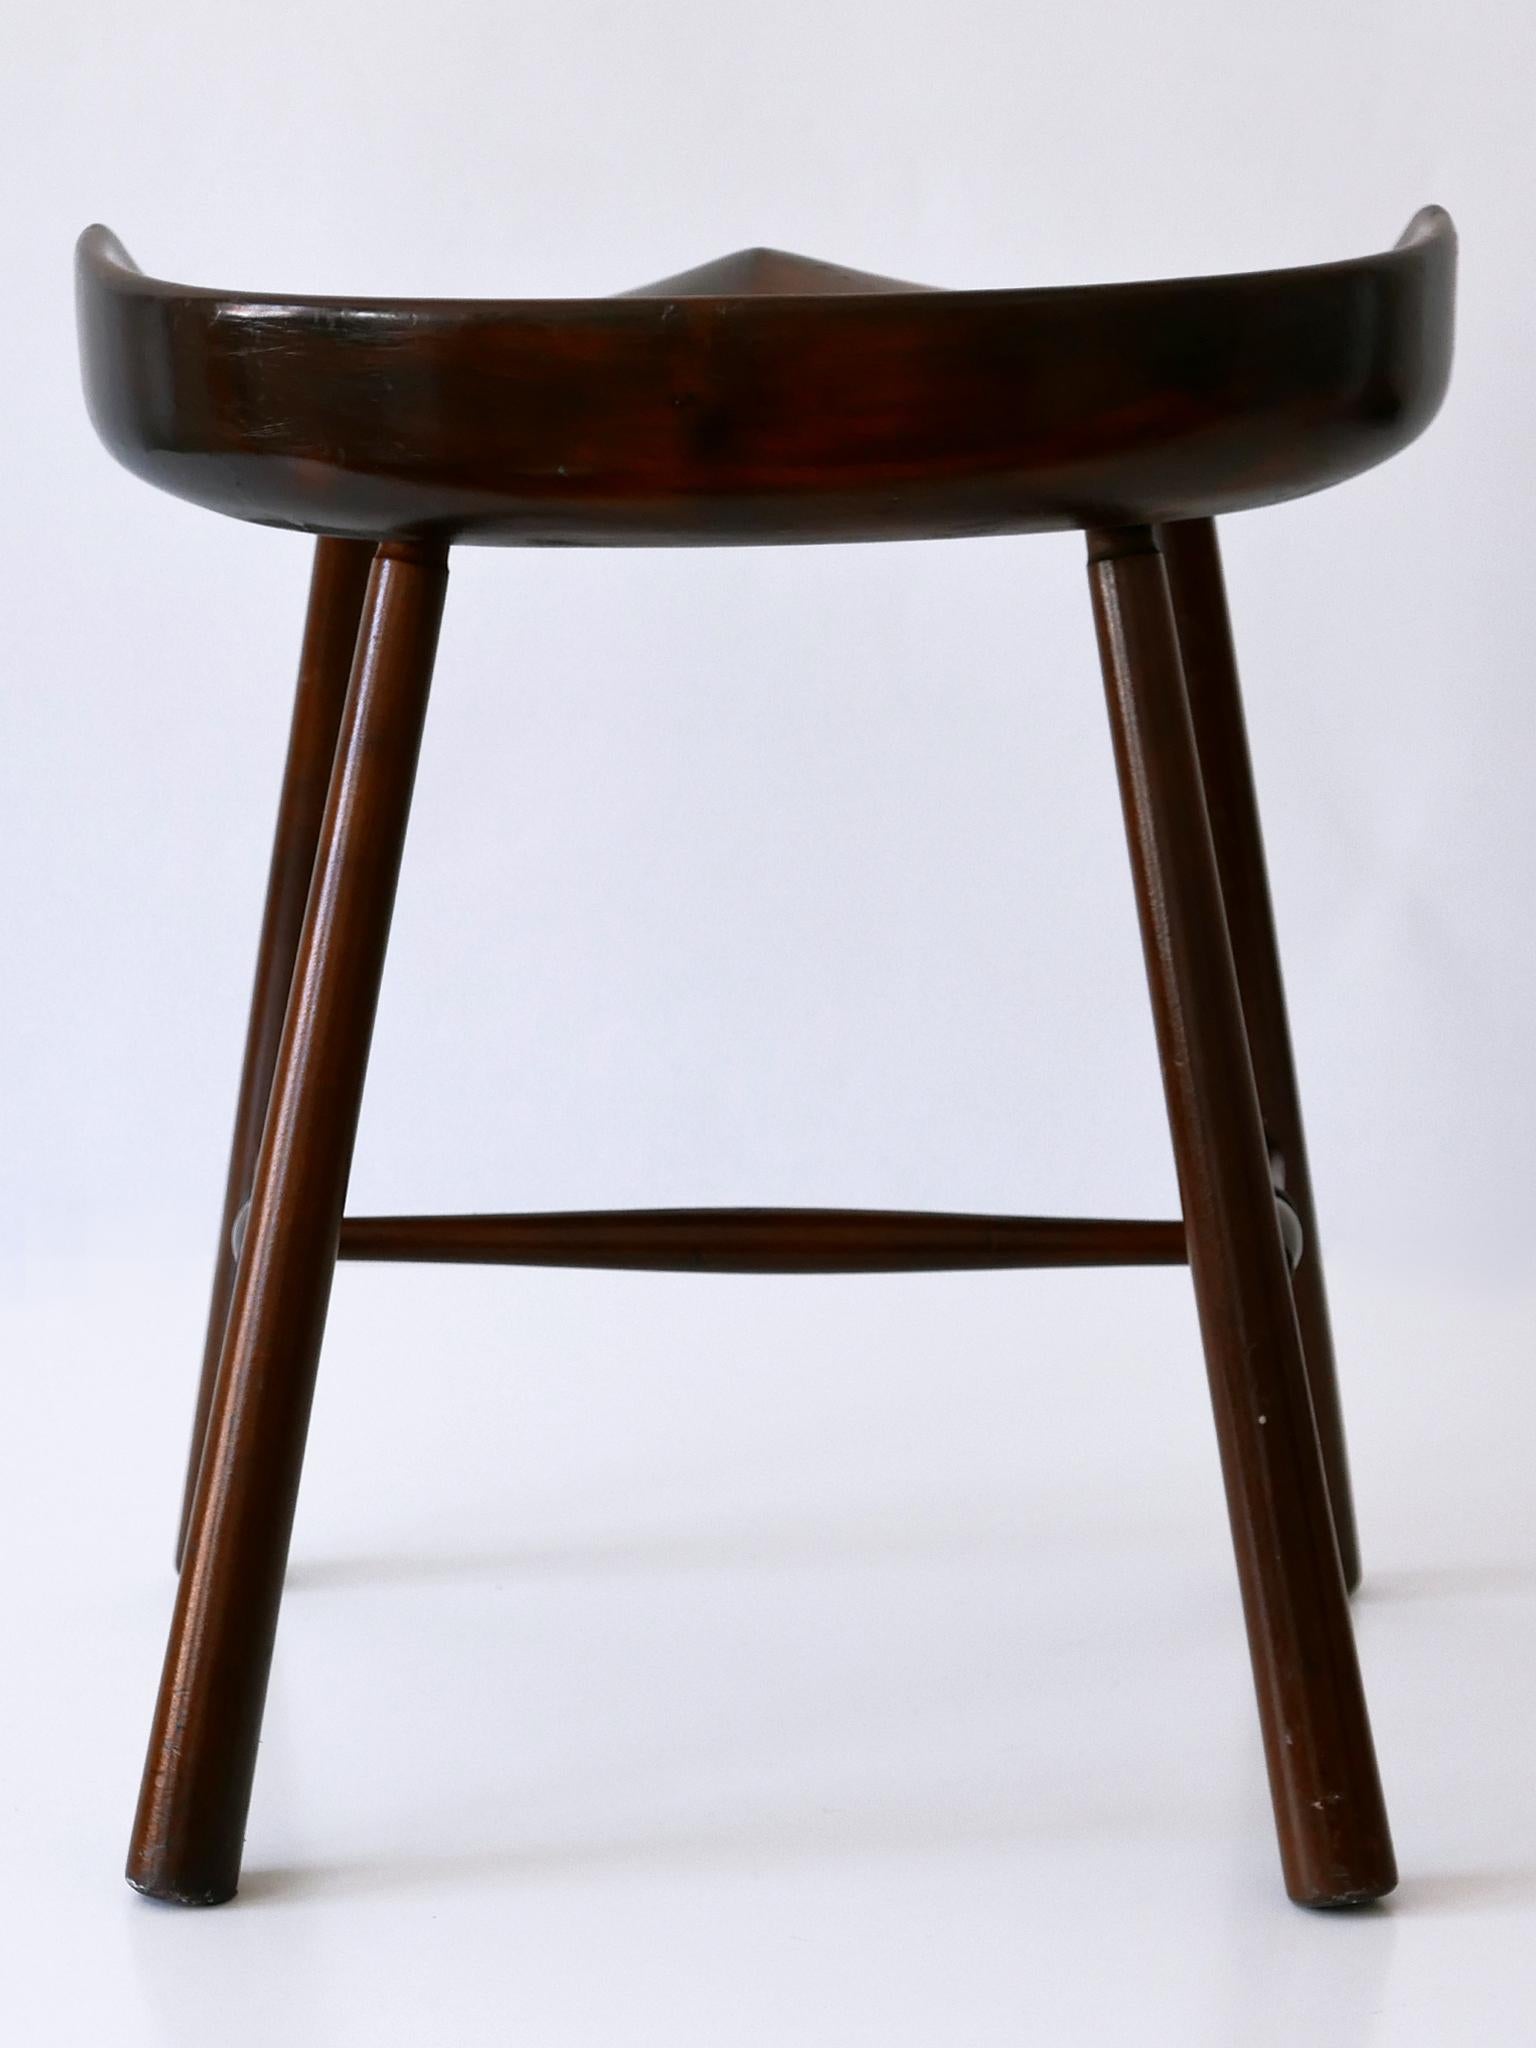 Sculptural Mid-Century Modern Solid Wood Stool Germany 1950s For Sale 1